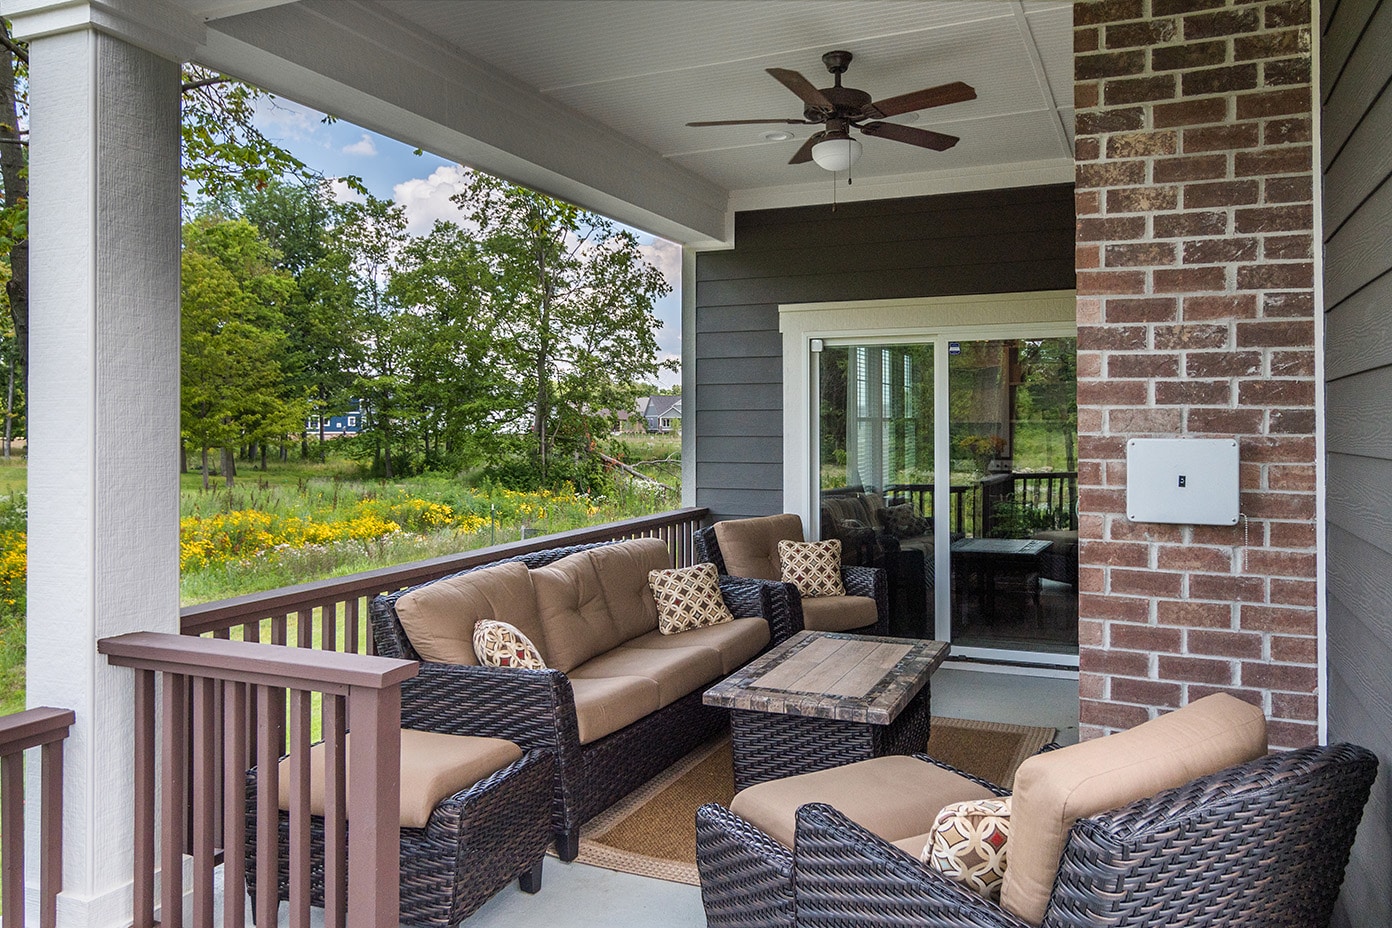 A porch with wicker furniture and a ceiling fan, designed and built by a Custom Home Builder Fishers Indiana.